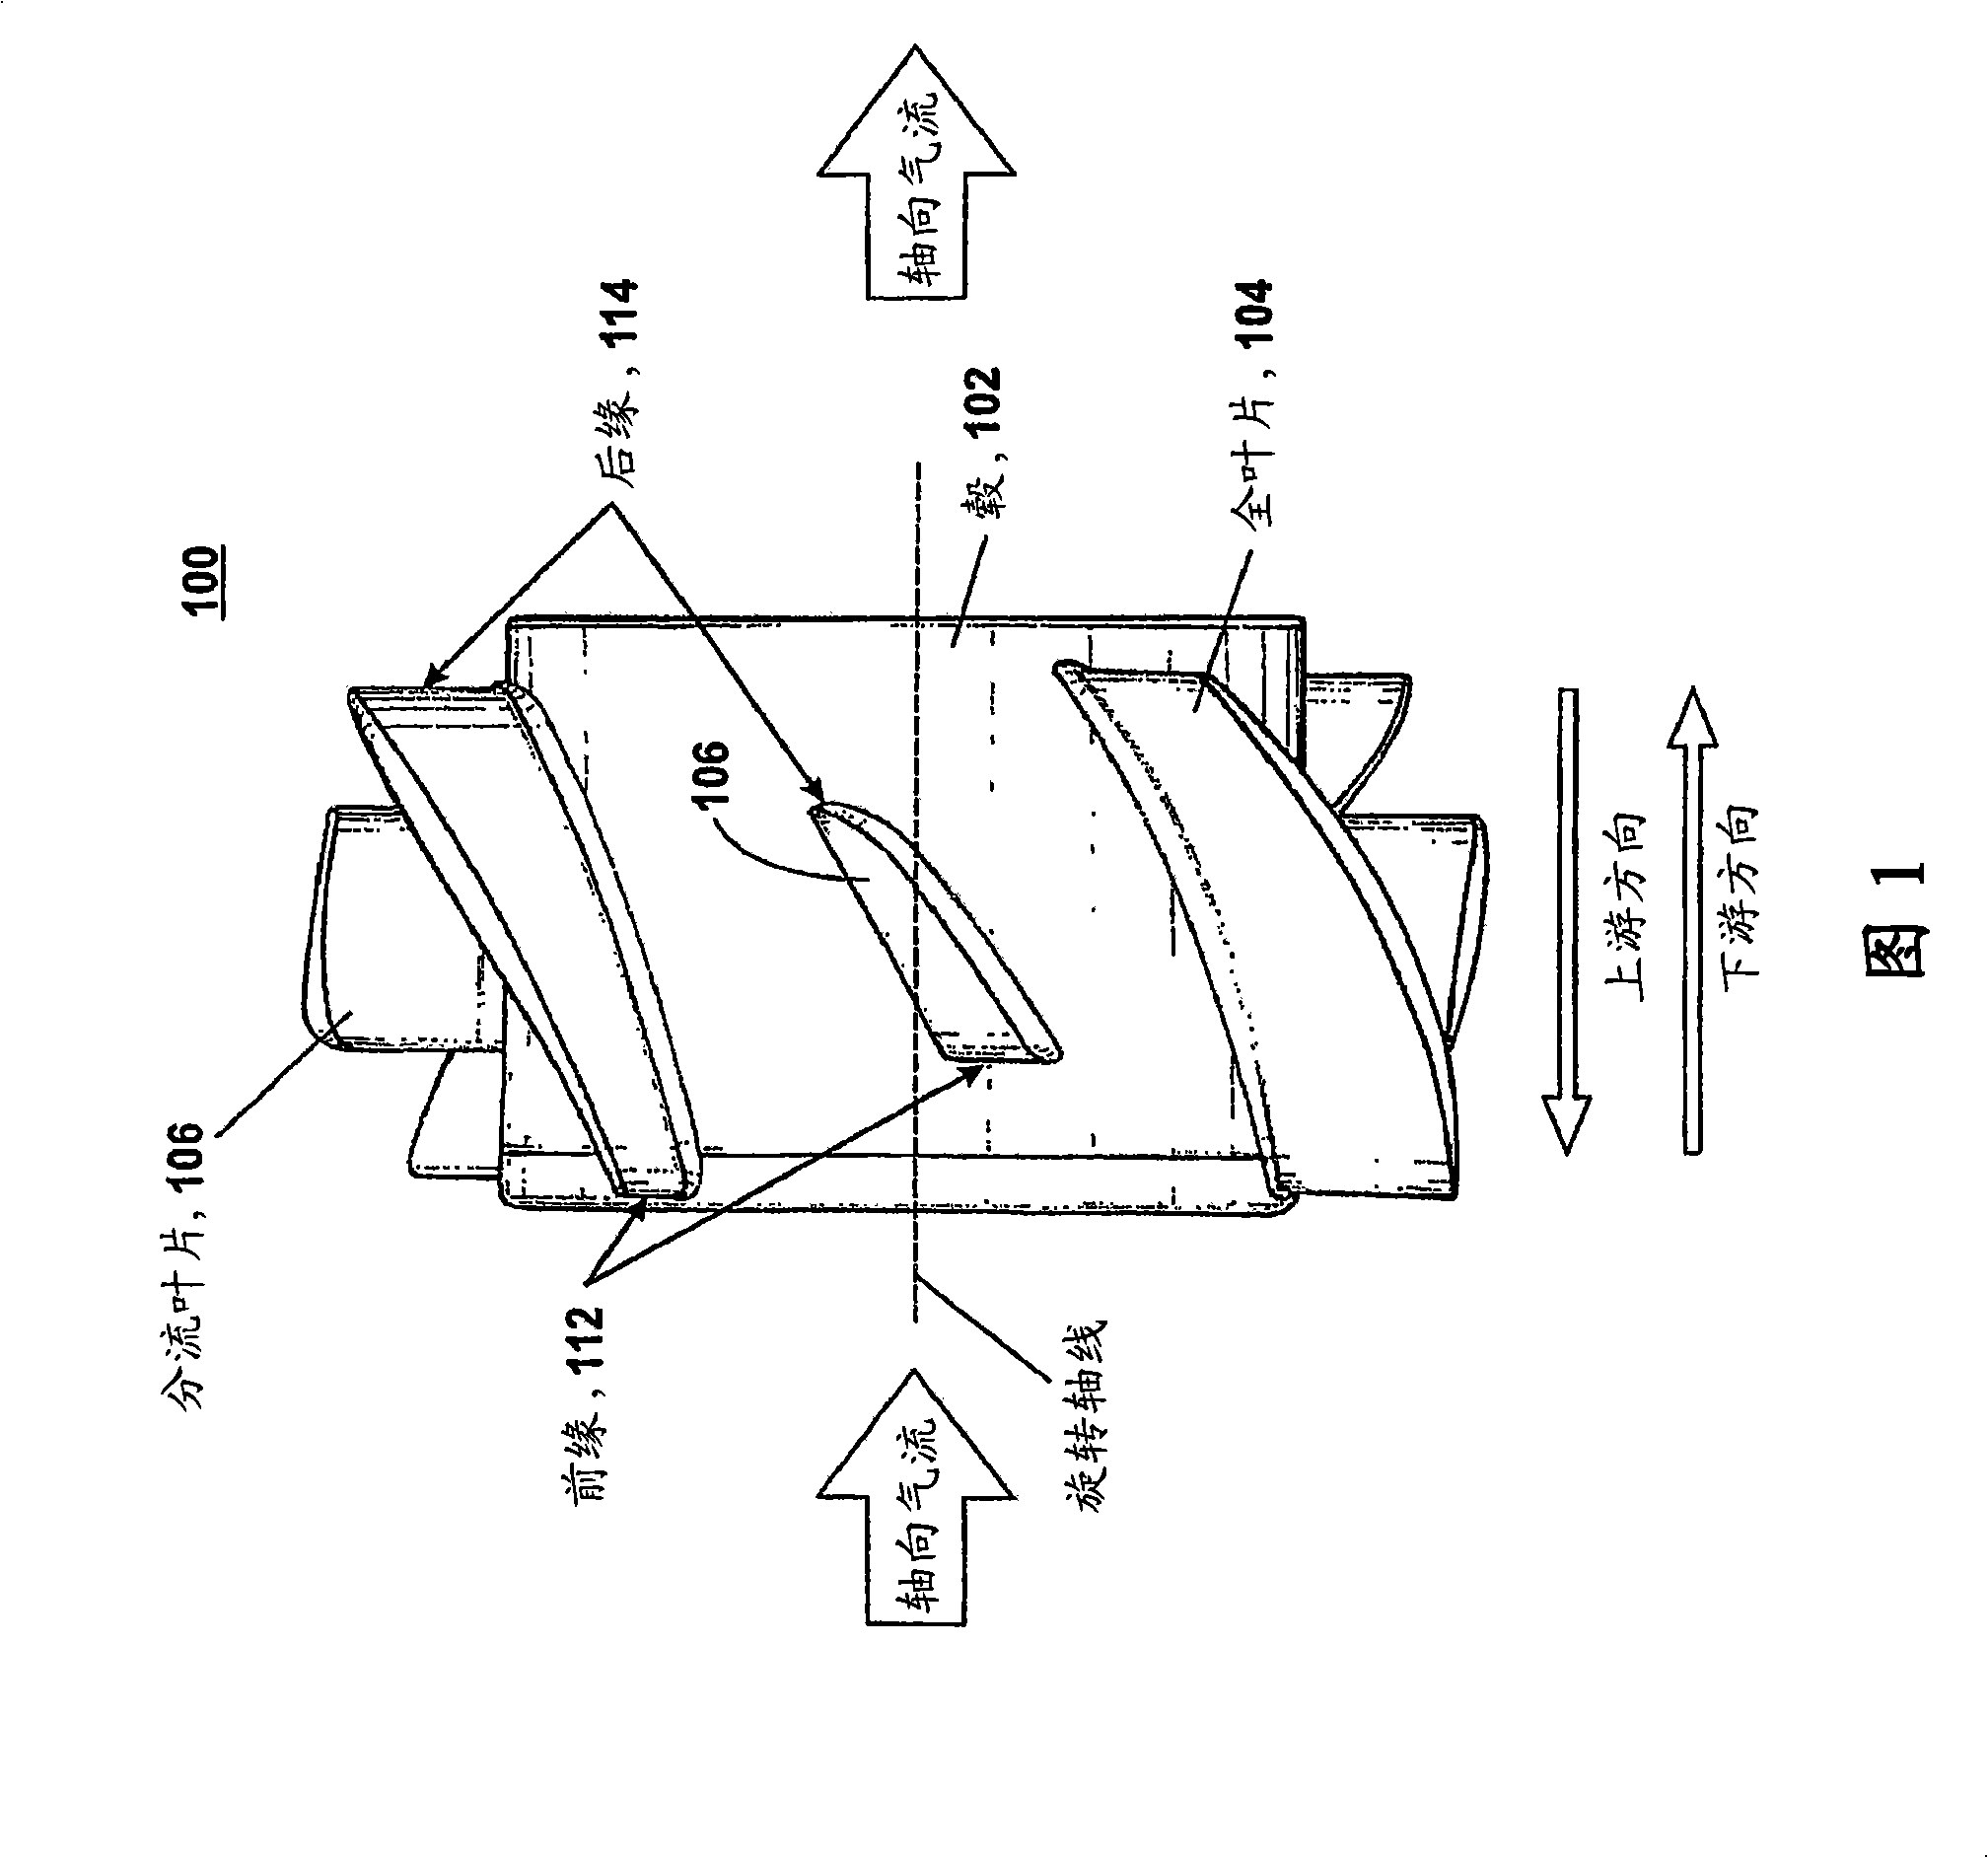 Reduction of tonal noise in cooling fans using splitter blades